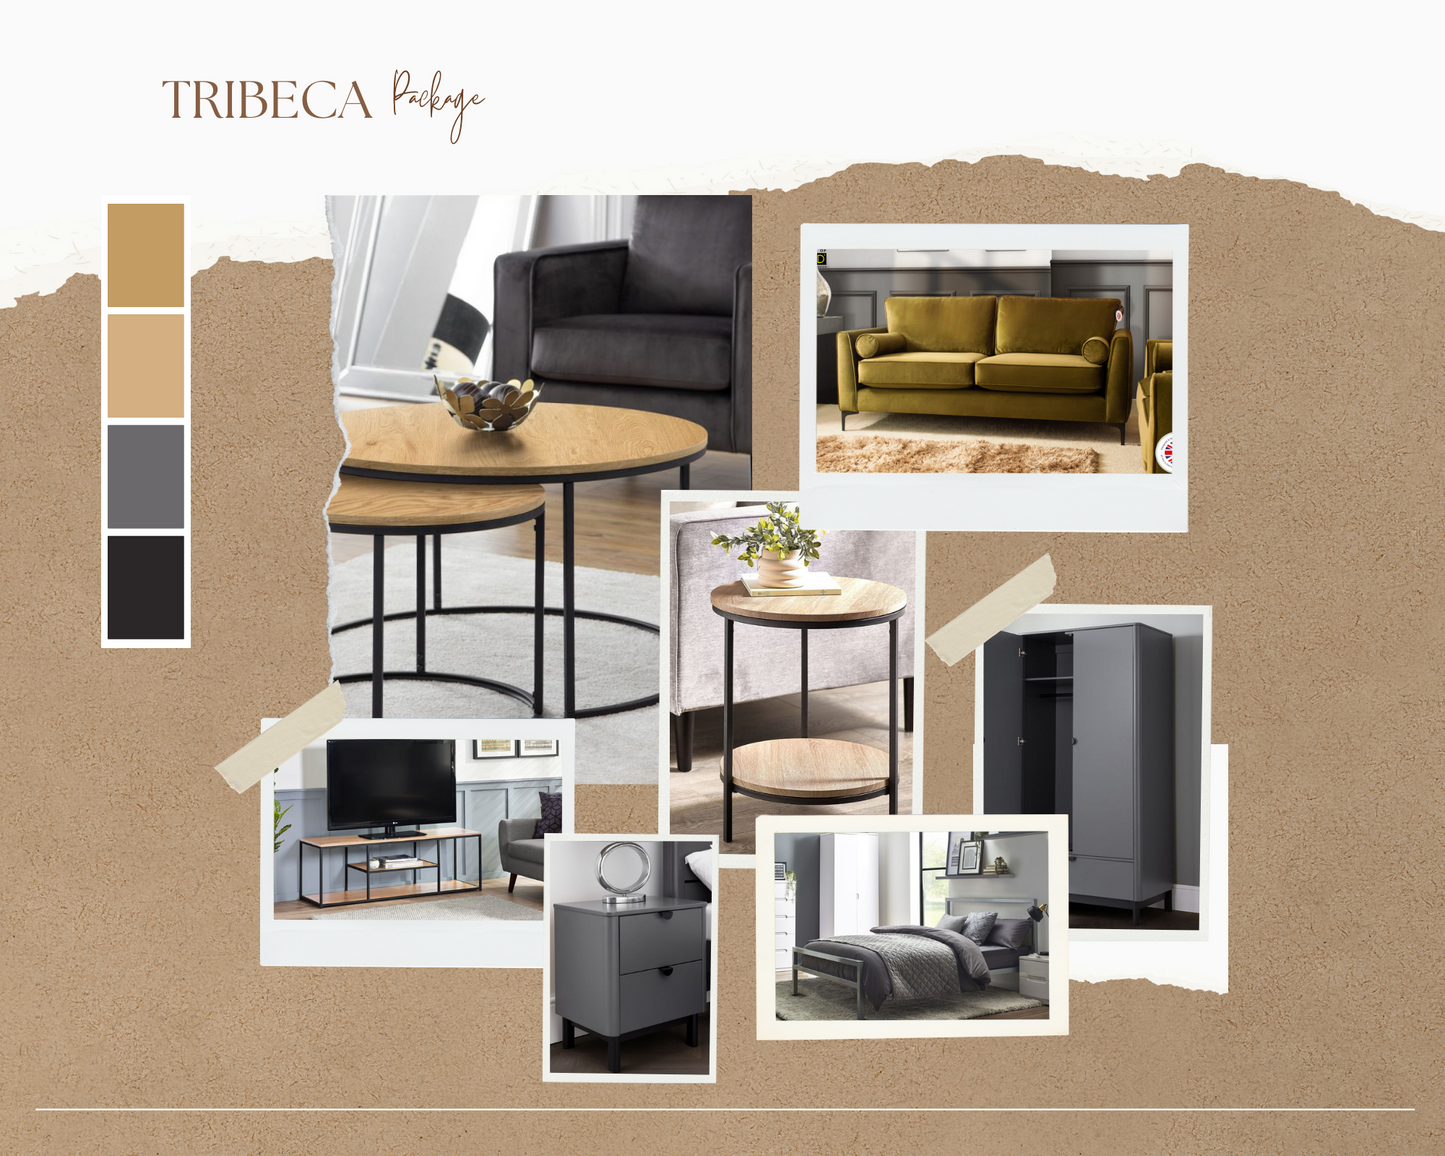 Tribeca Package